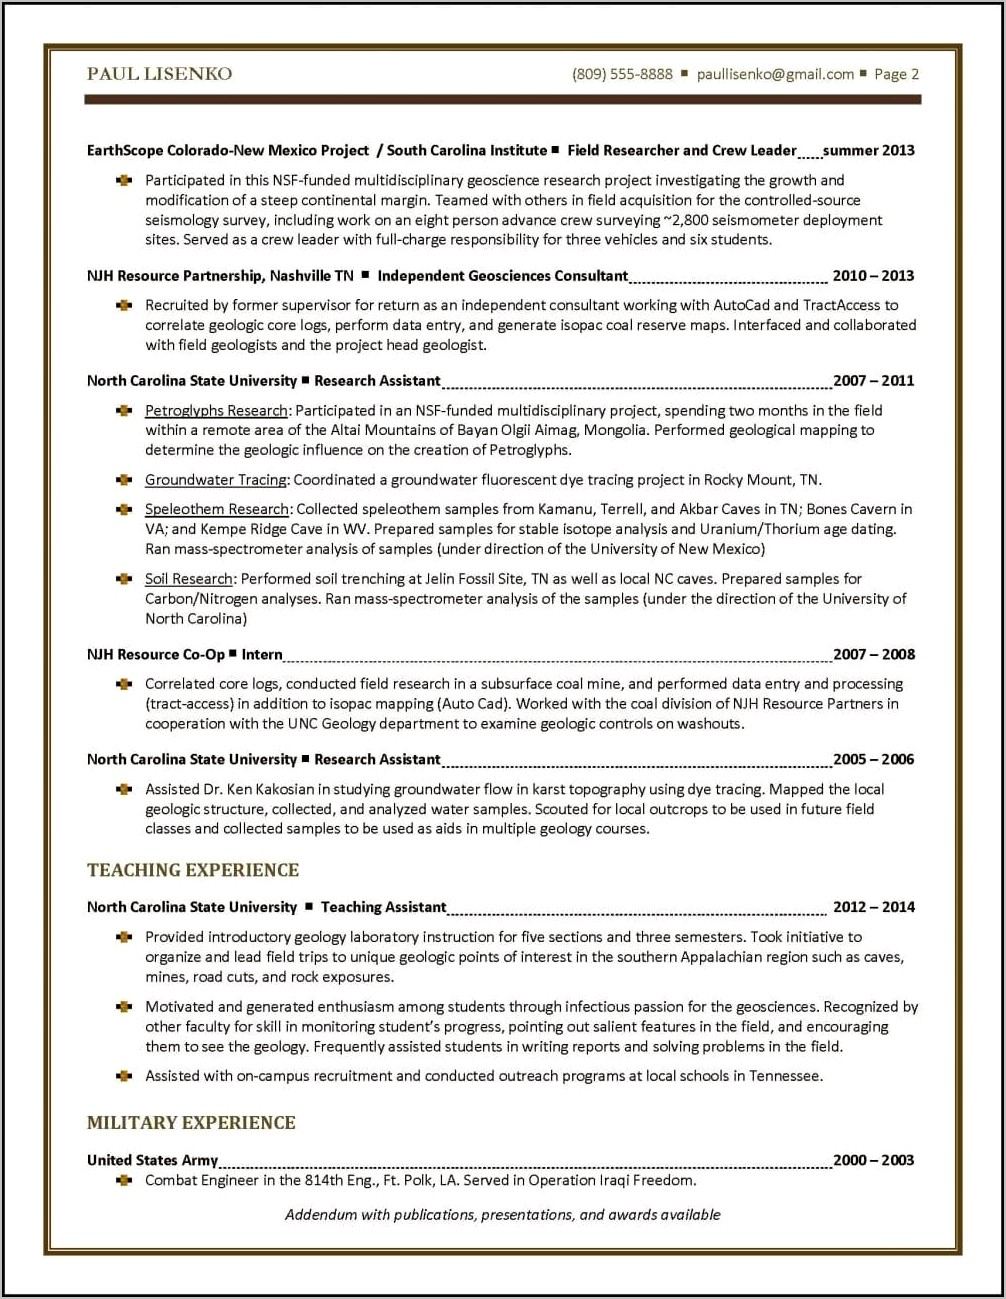 Resume Objective For Coal Miner